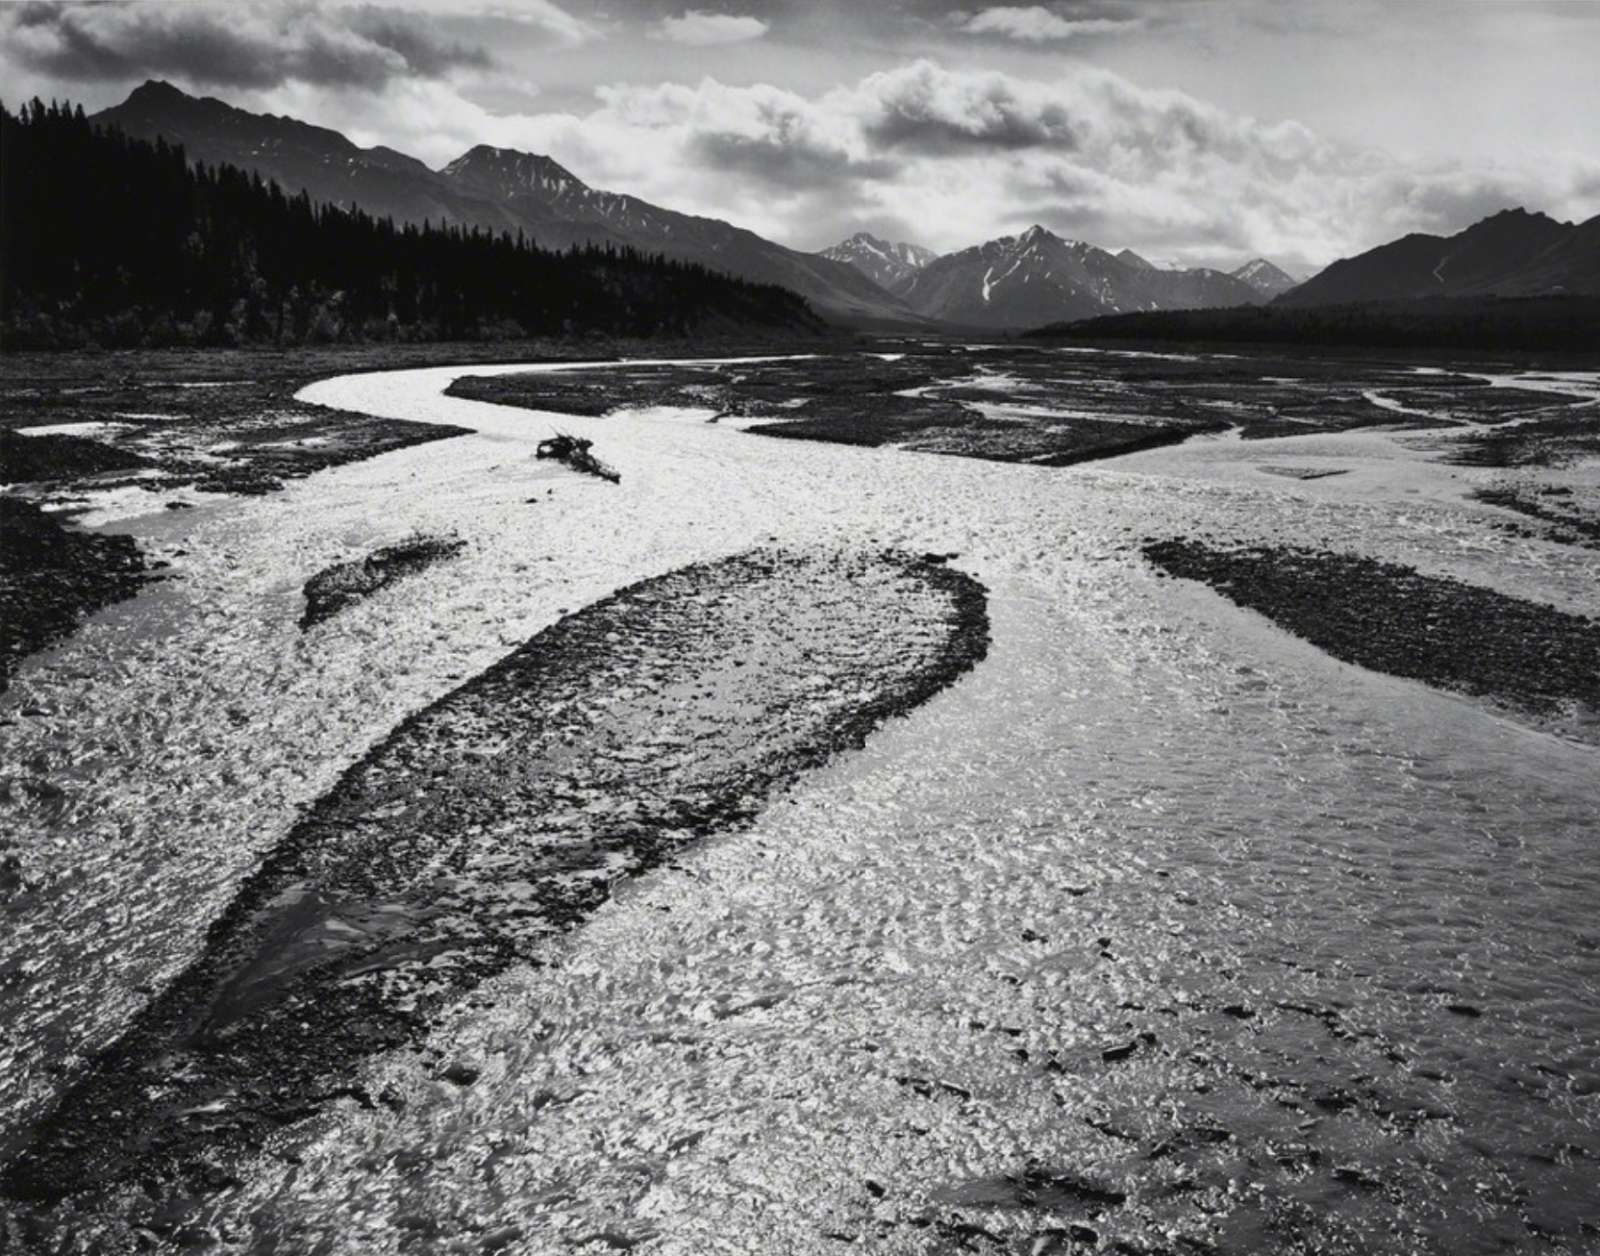 Ansel Adams, Teklanika River, Mount McKinley National Park, Alaska, 1947, From Portfolio Four: What Majestic Word. Print #1, Published in 1963 by the Sierra Club San Francisco